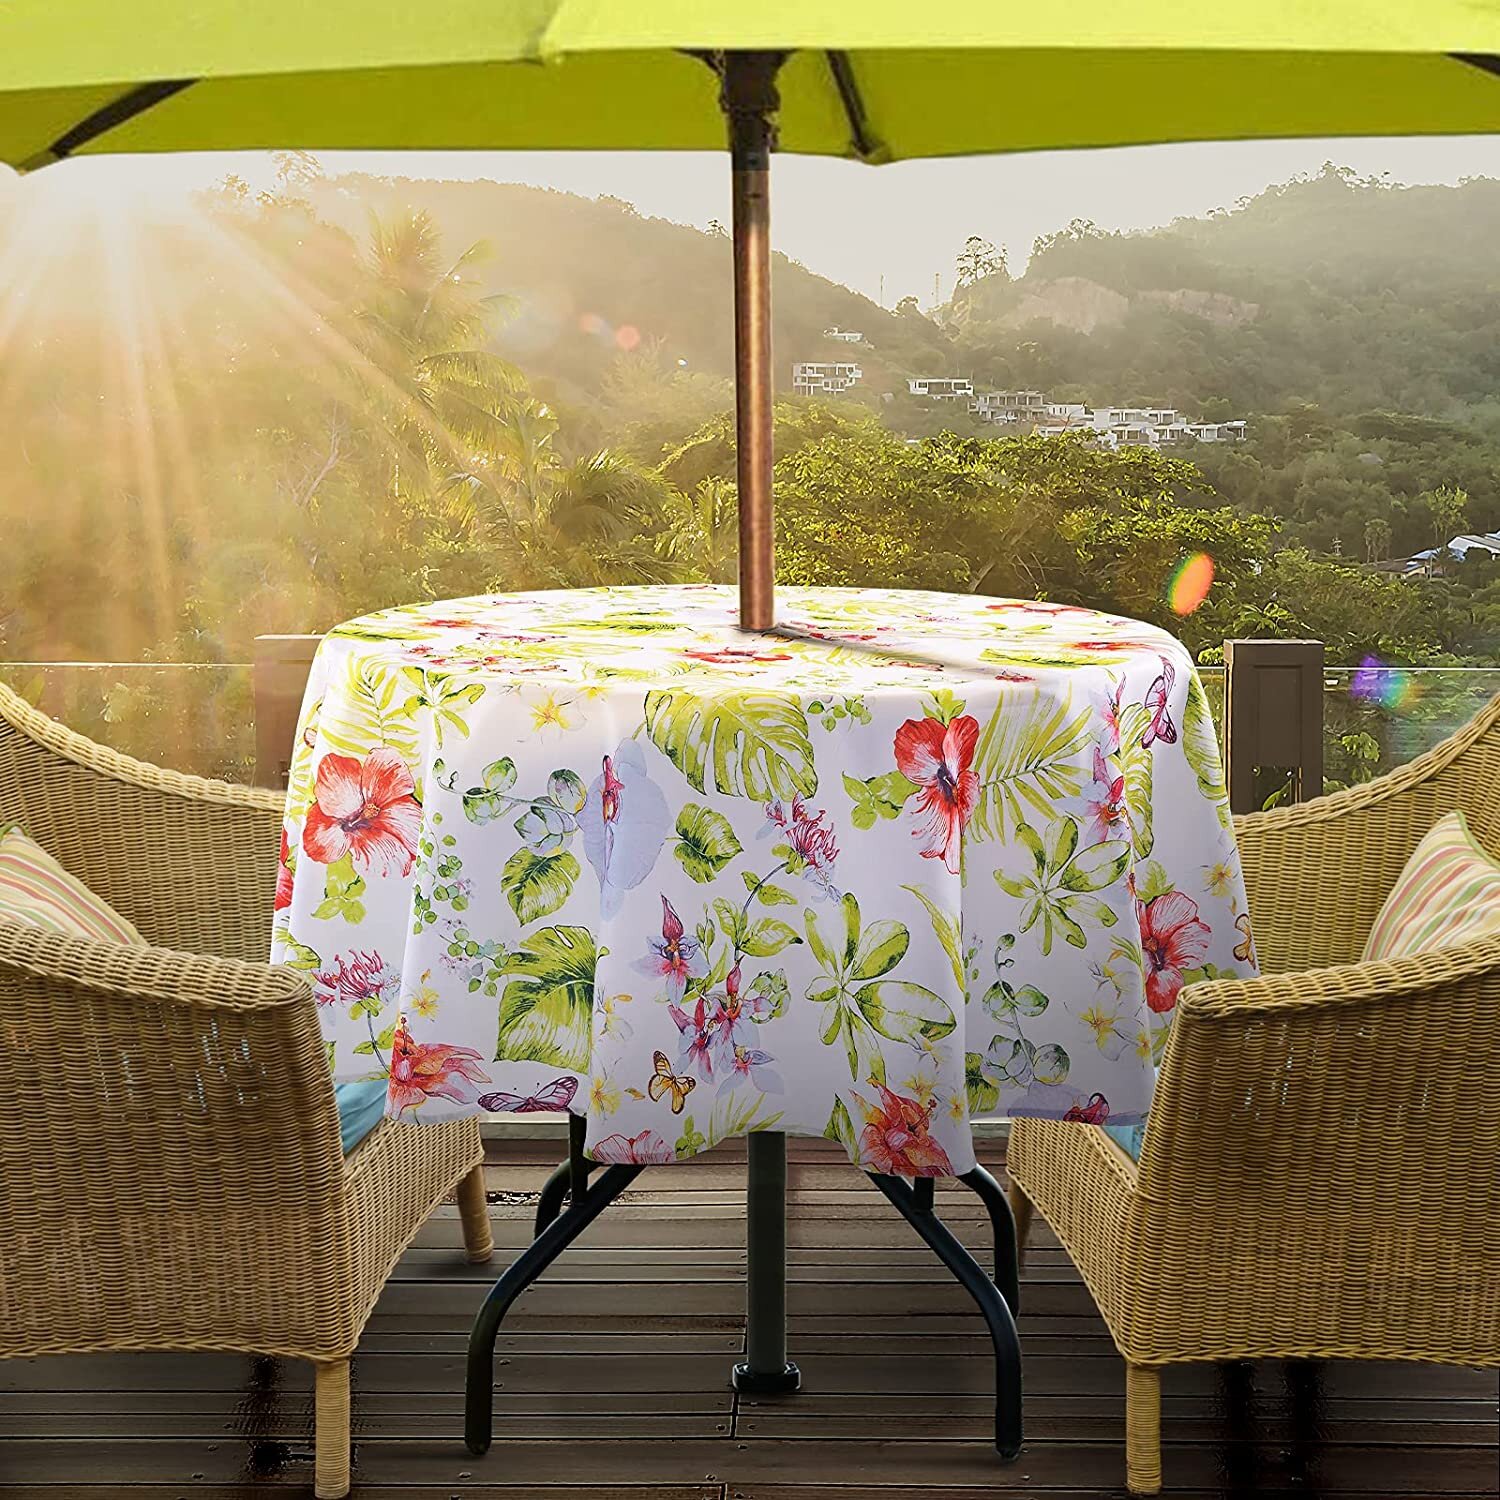 Seats 4 People Round 60, Flower iisutas Outdoor Patio Tablecloth with Umbrella Hole and Zipper Water and Stain Resistant Fabric Table Cloth for Umbrella Table